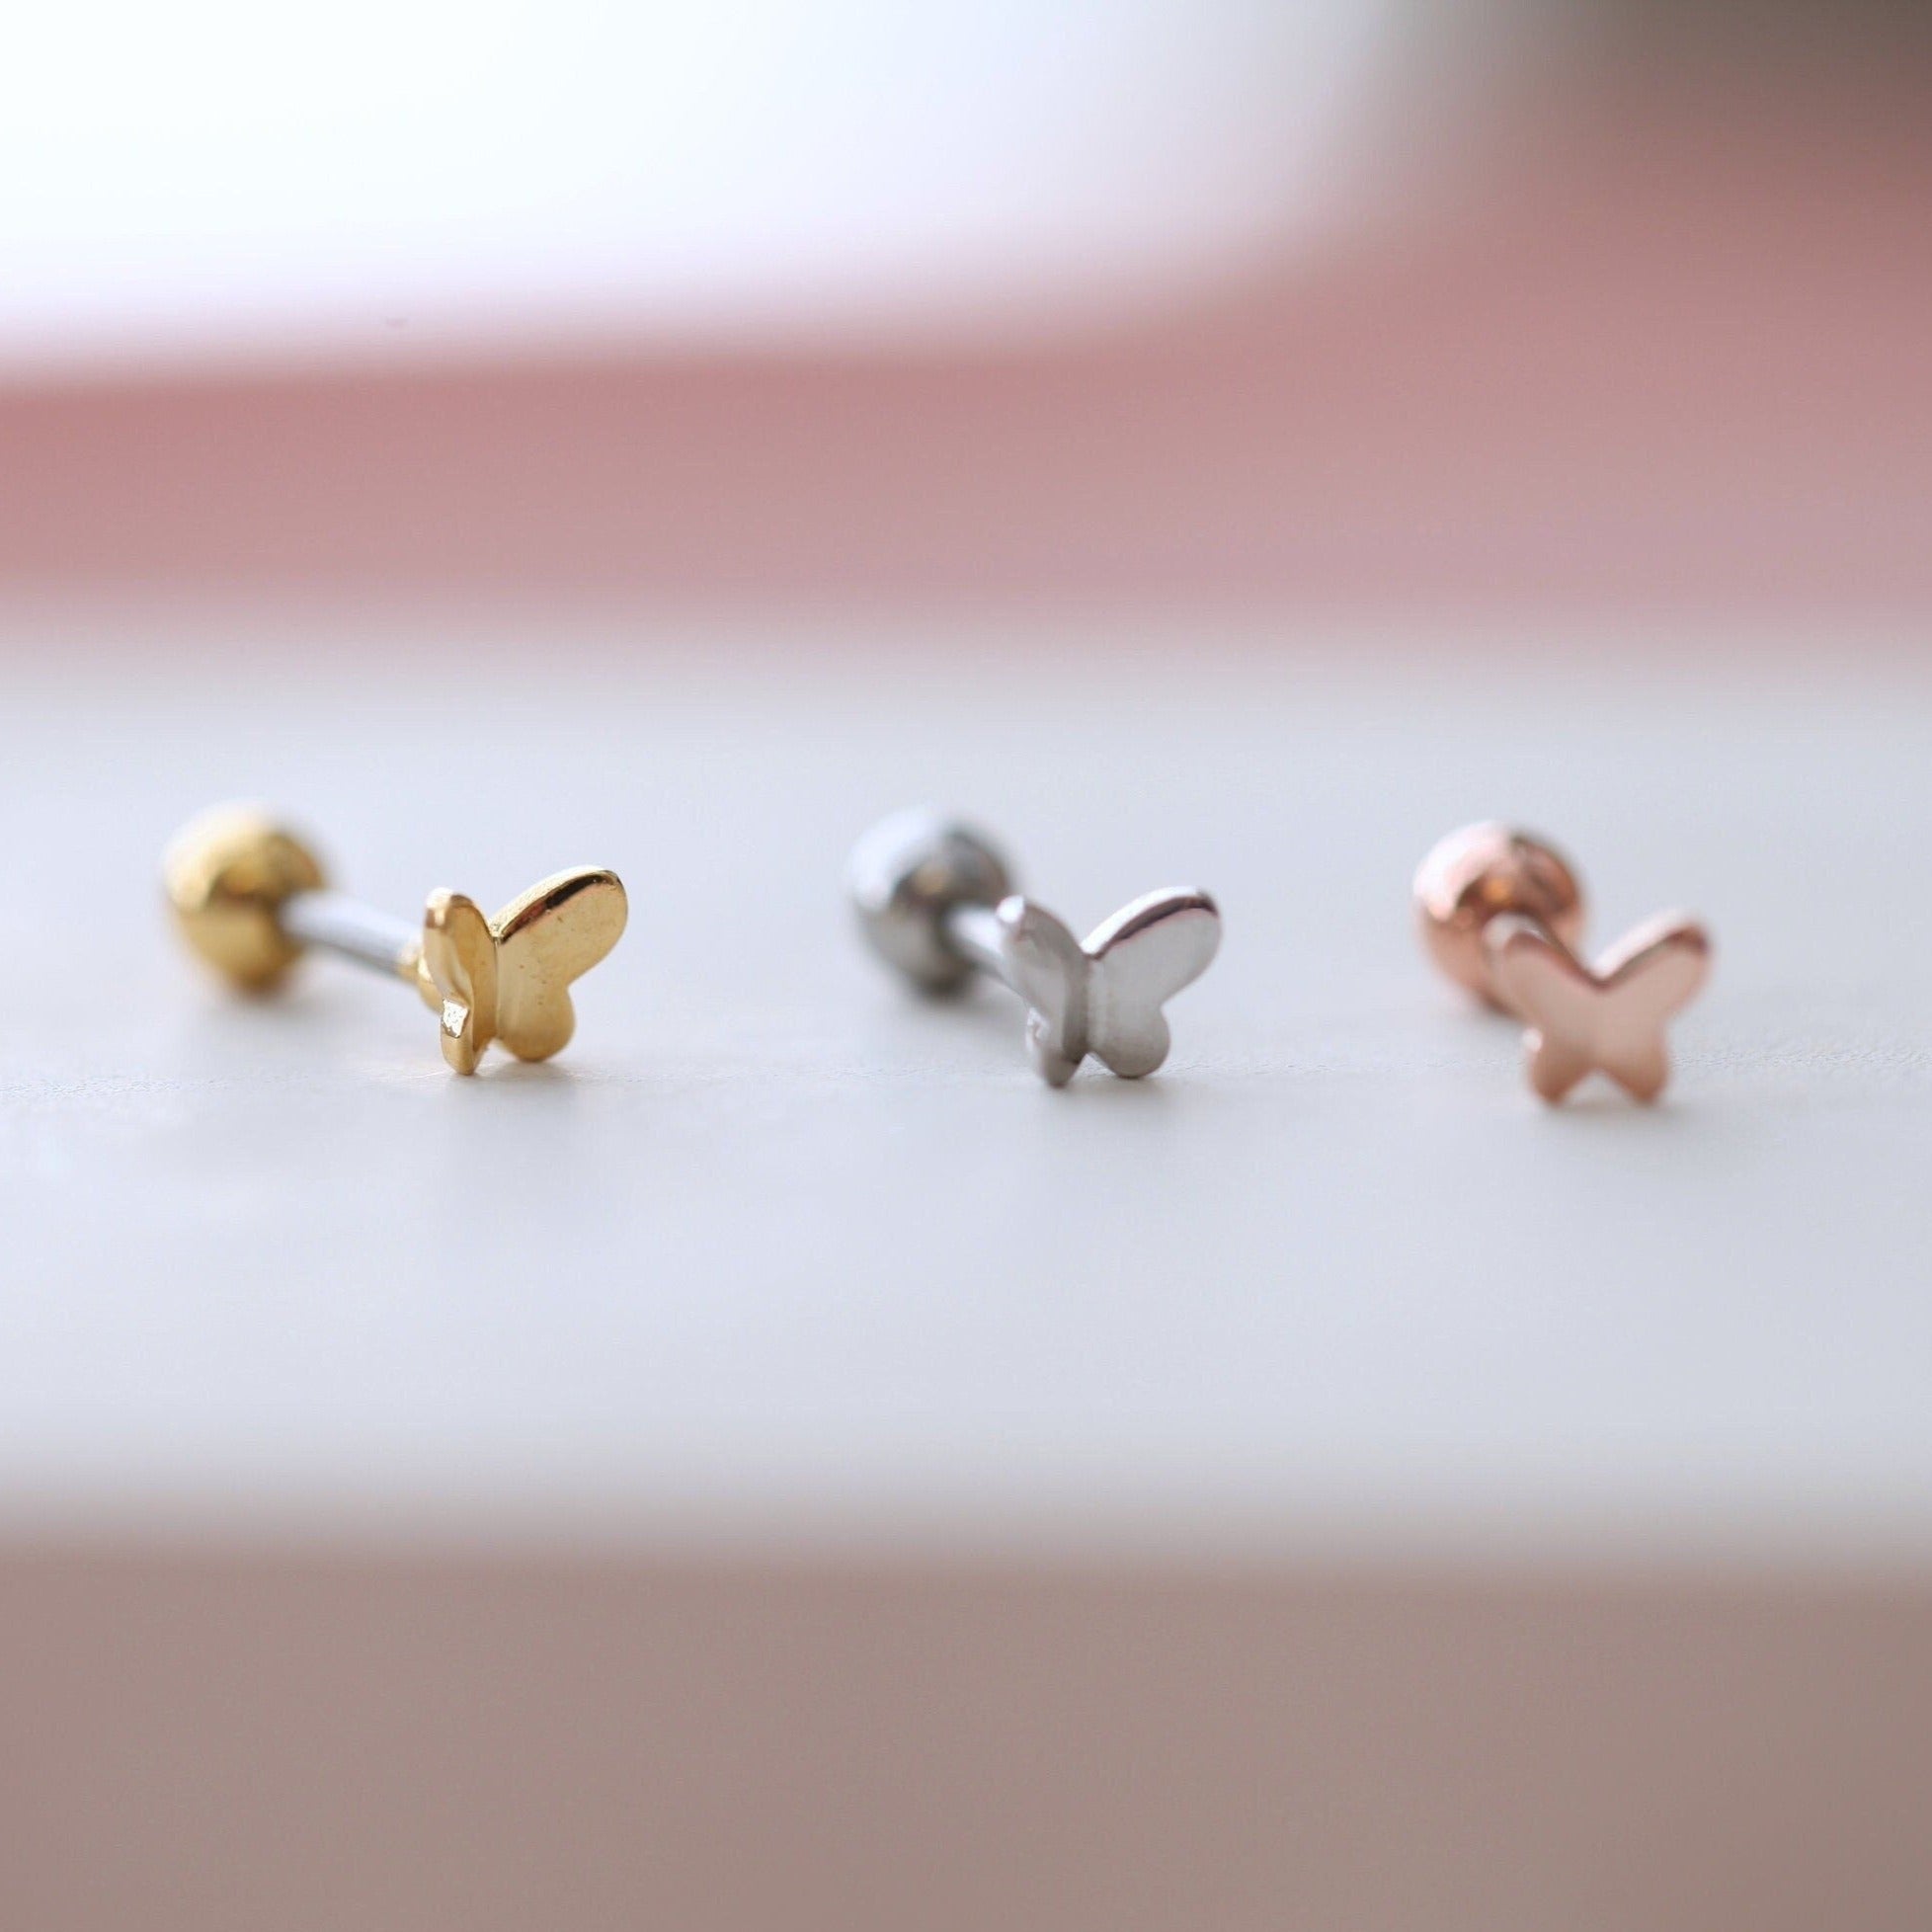 Top more than 185 butterfly design earrings super hot